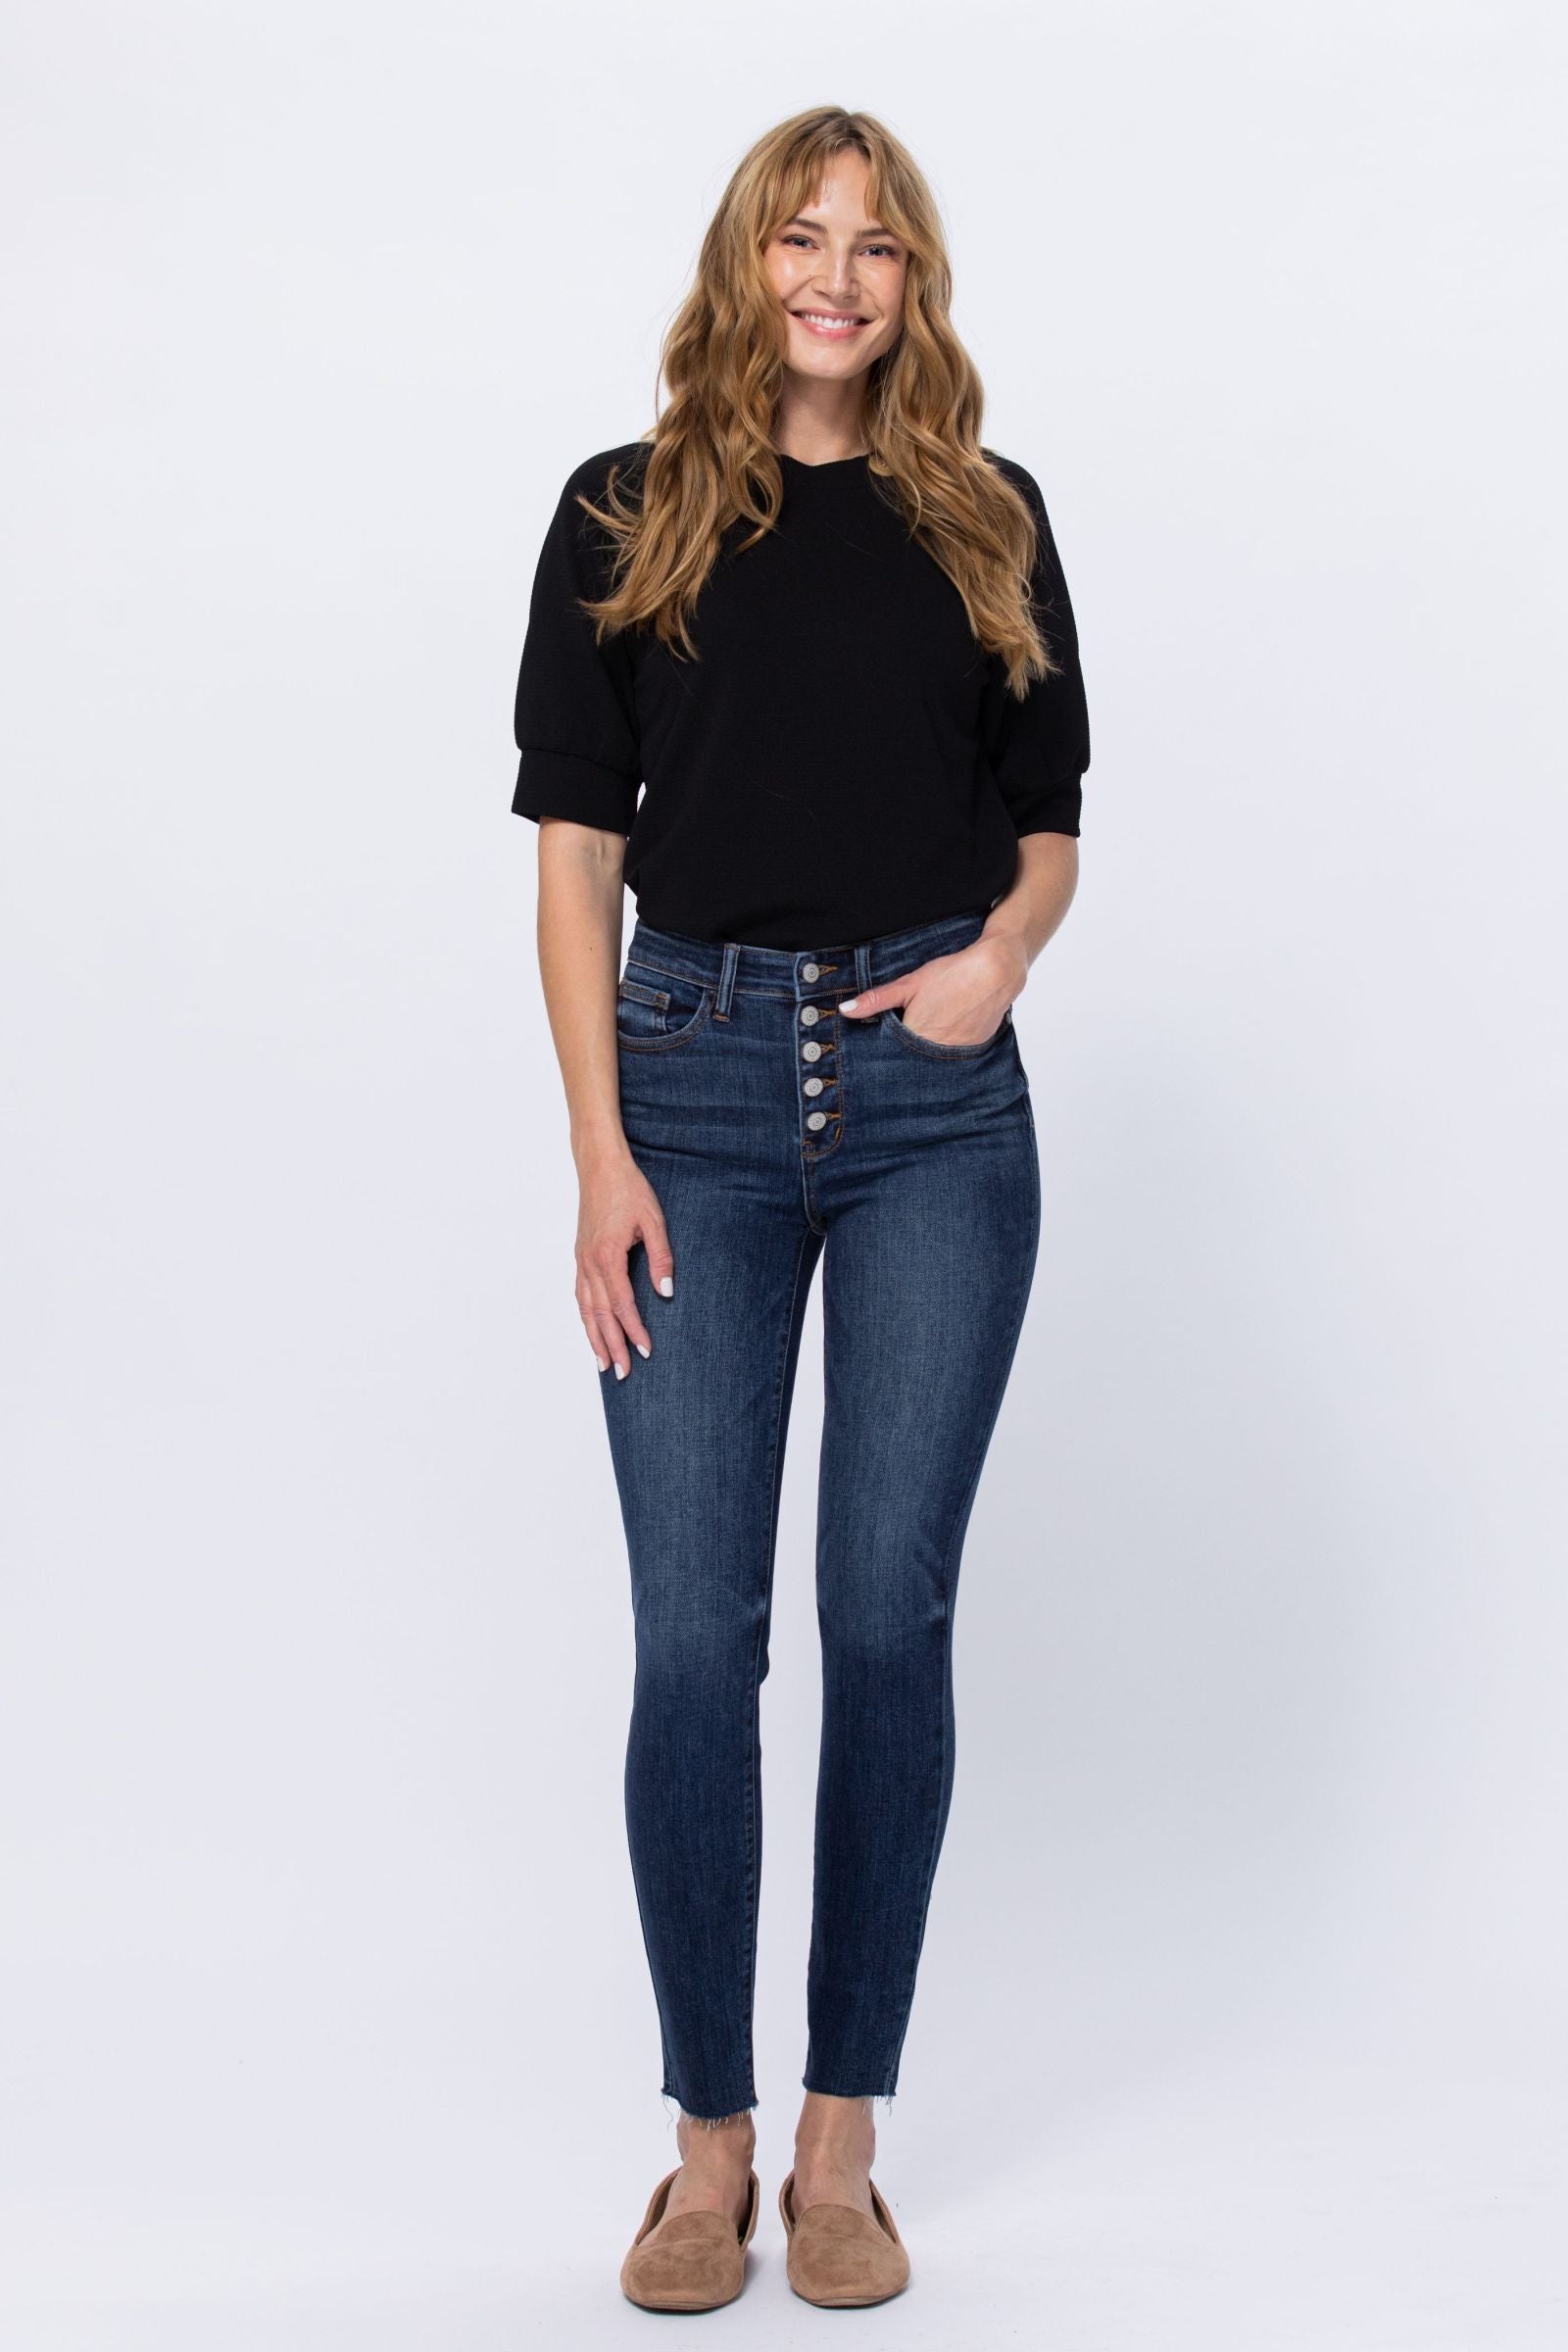 Judy Blue Khaki High Waist Control Top Flare Jeans - Boujee Boutique